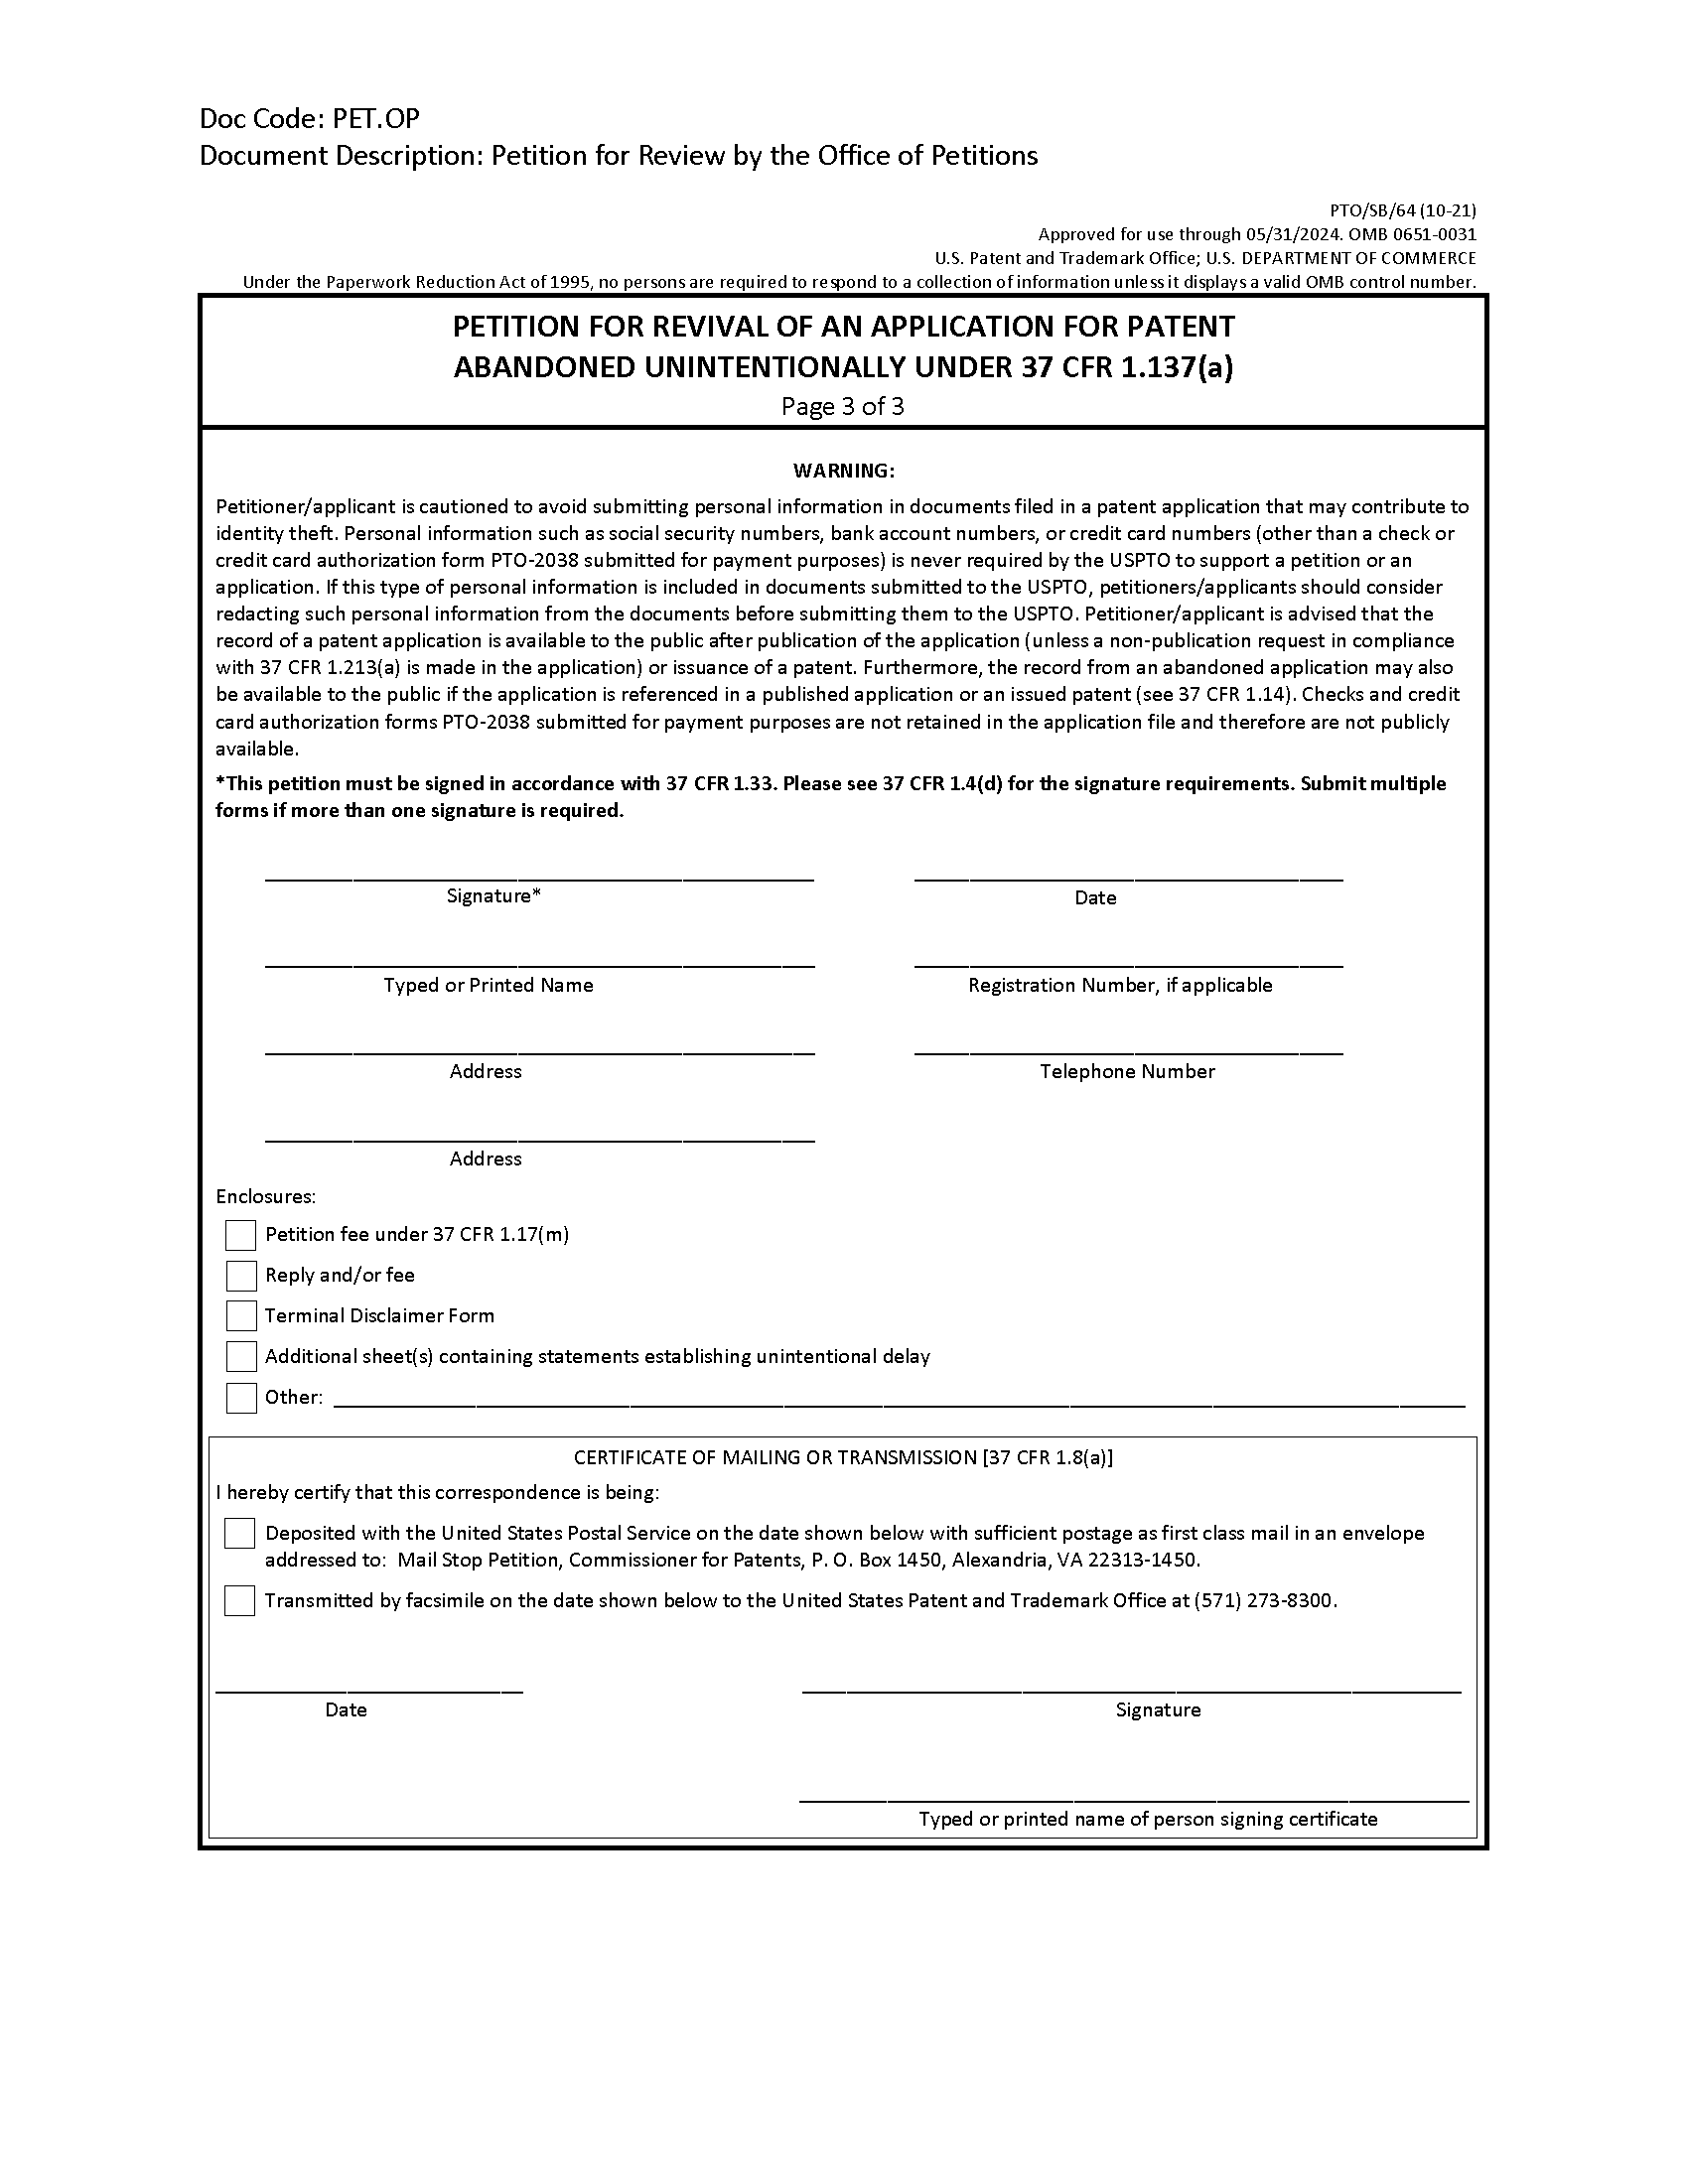 Form PTO/SB/64. Petition for Revival of an Application for Patent Abandoned Unintentionally Under 37 CFR 1.137(b) [Page 3 of 3]